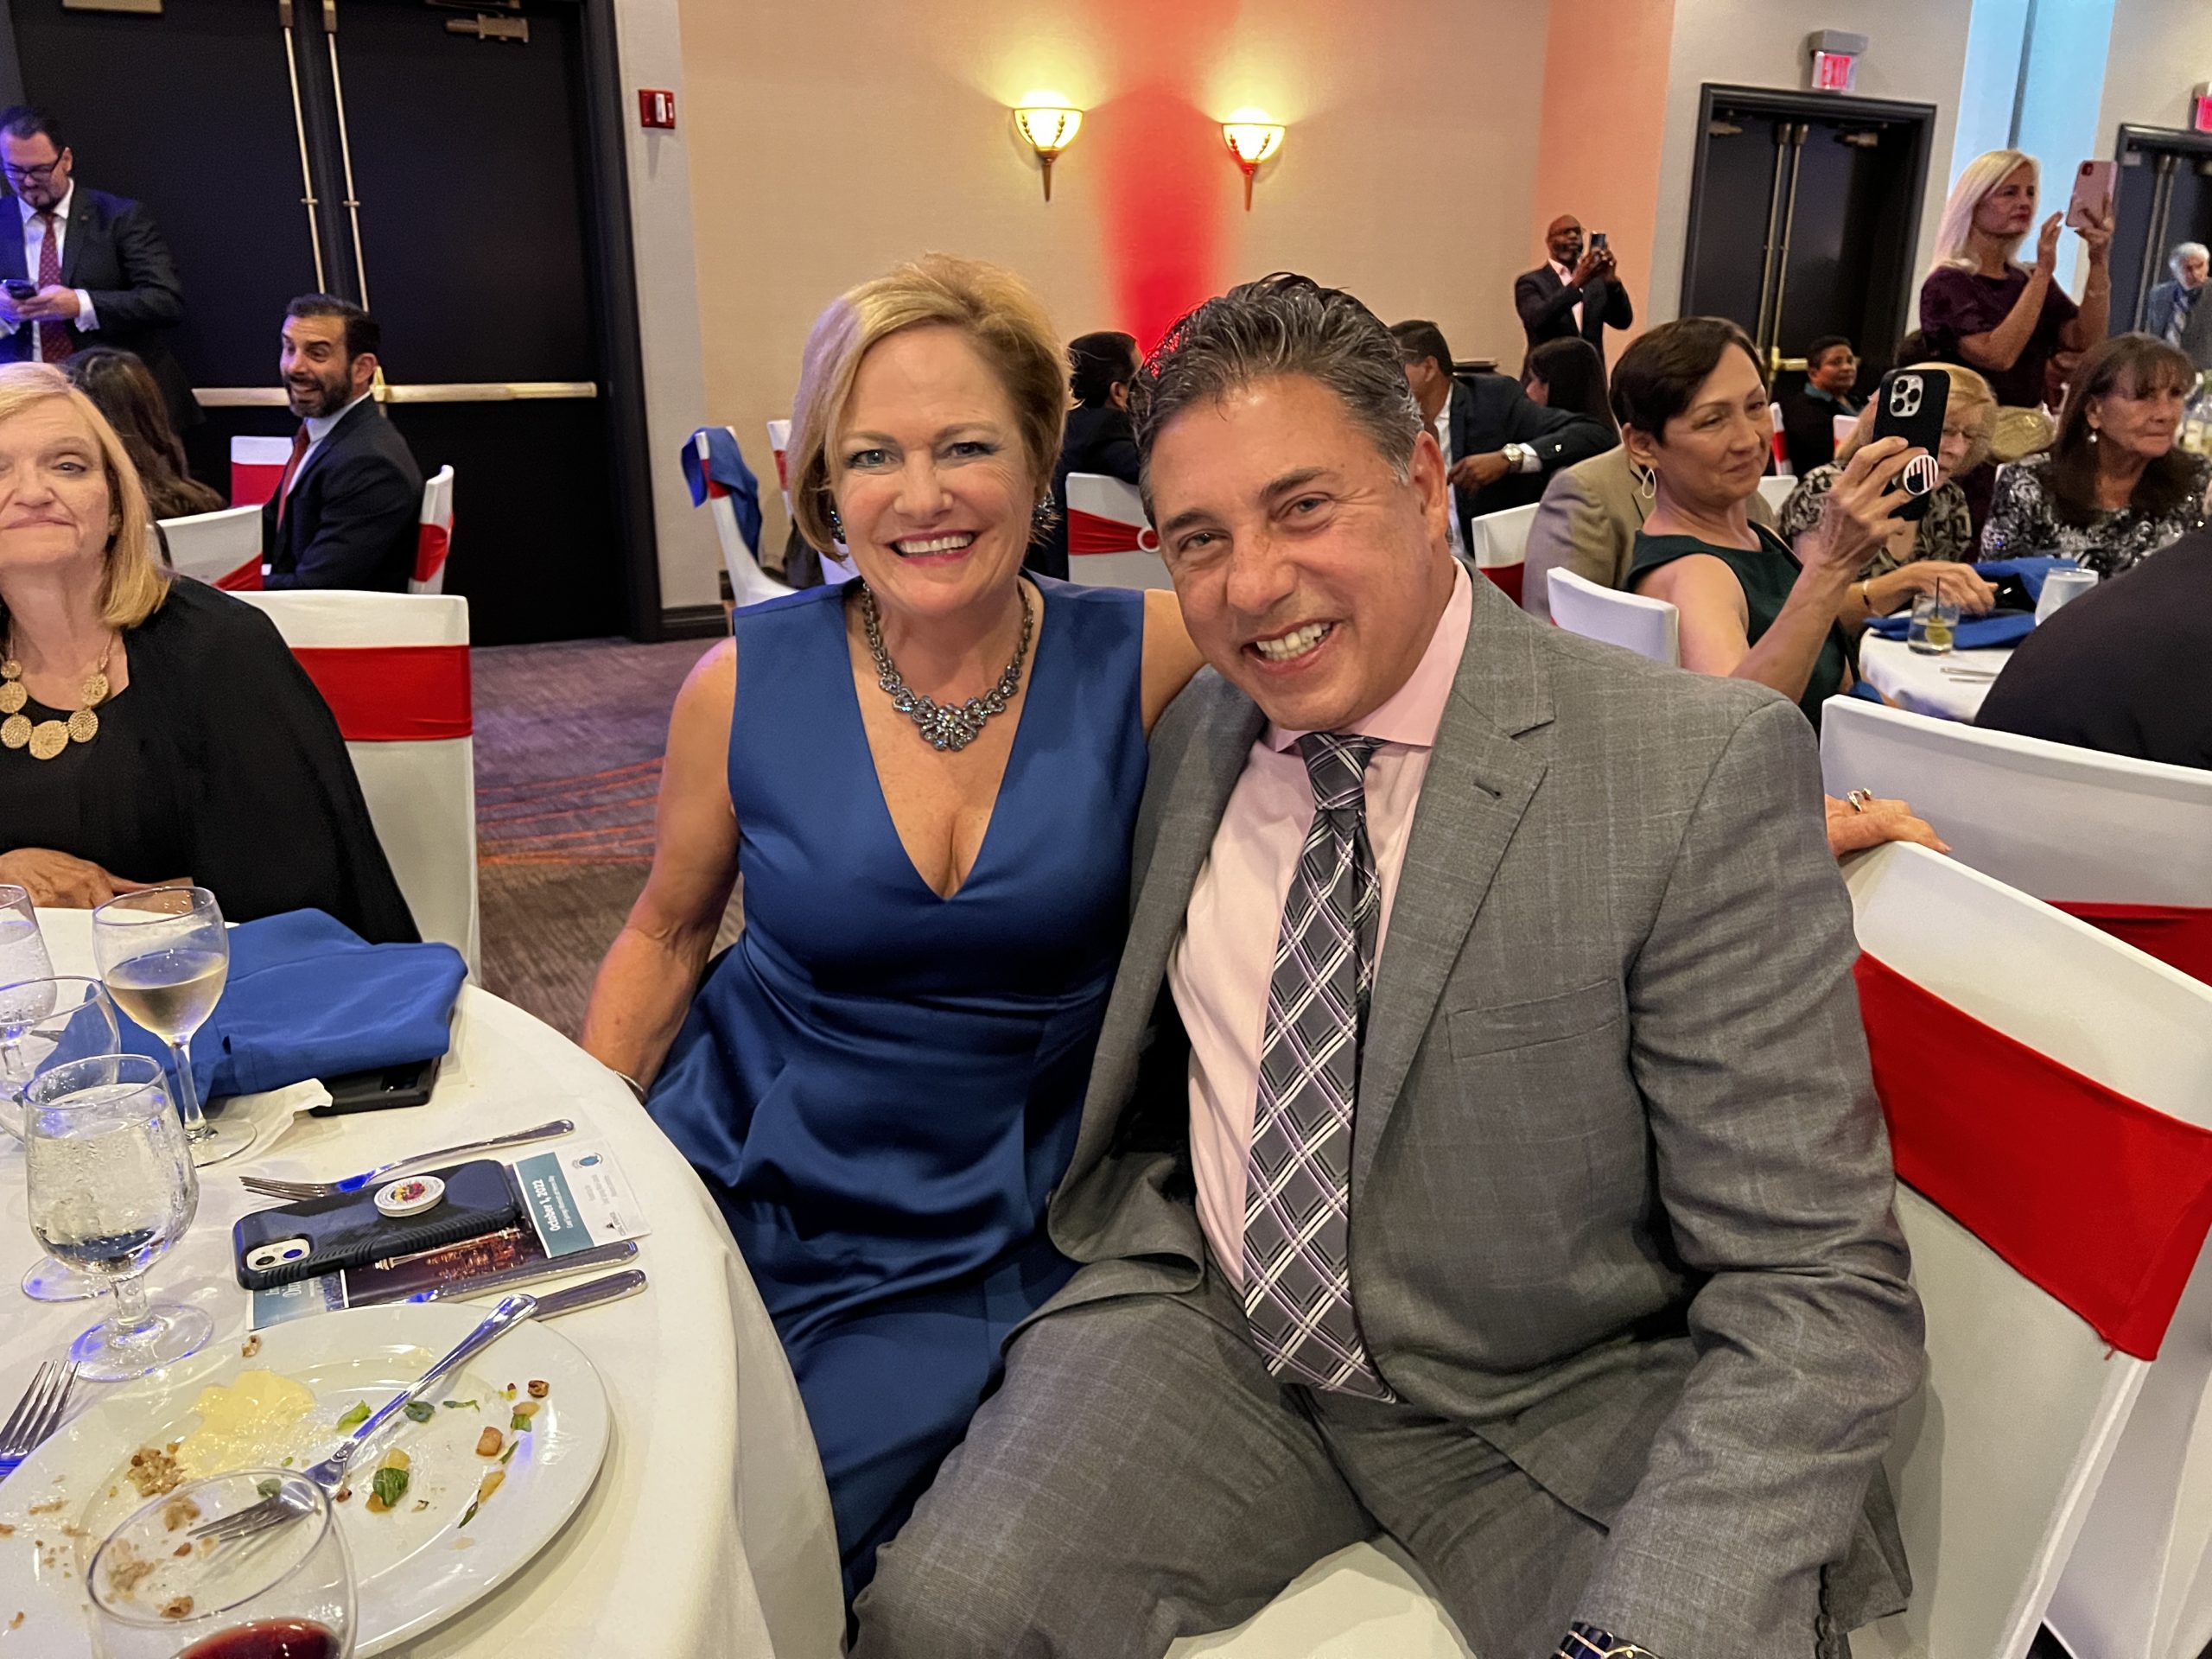 Sold-Out Coral Springs International Dinner Dance Celebrates the USA